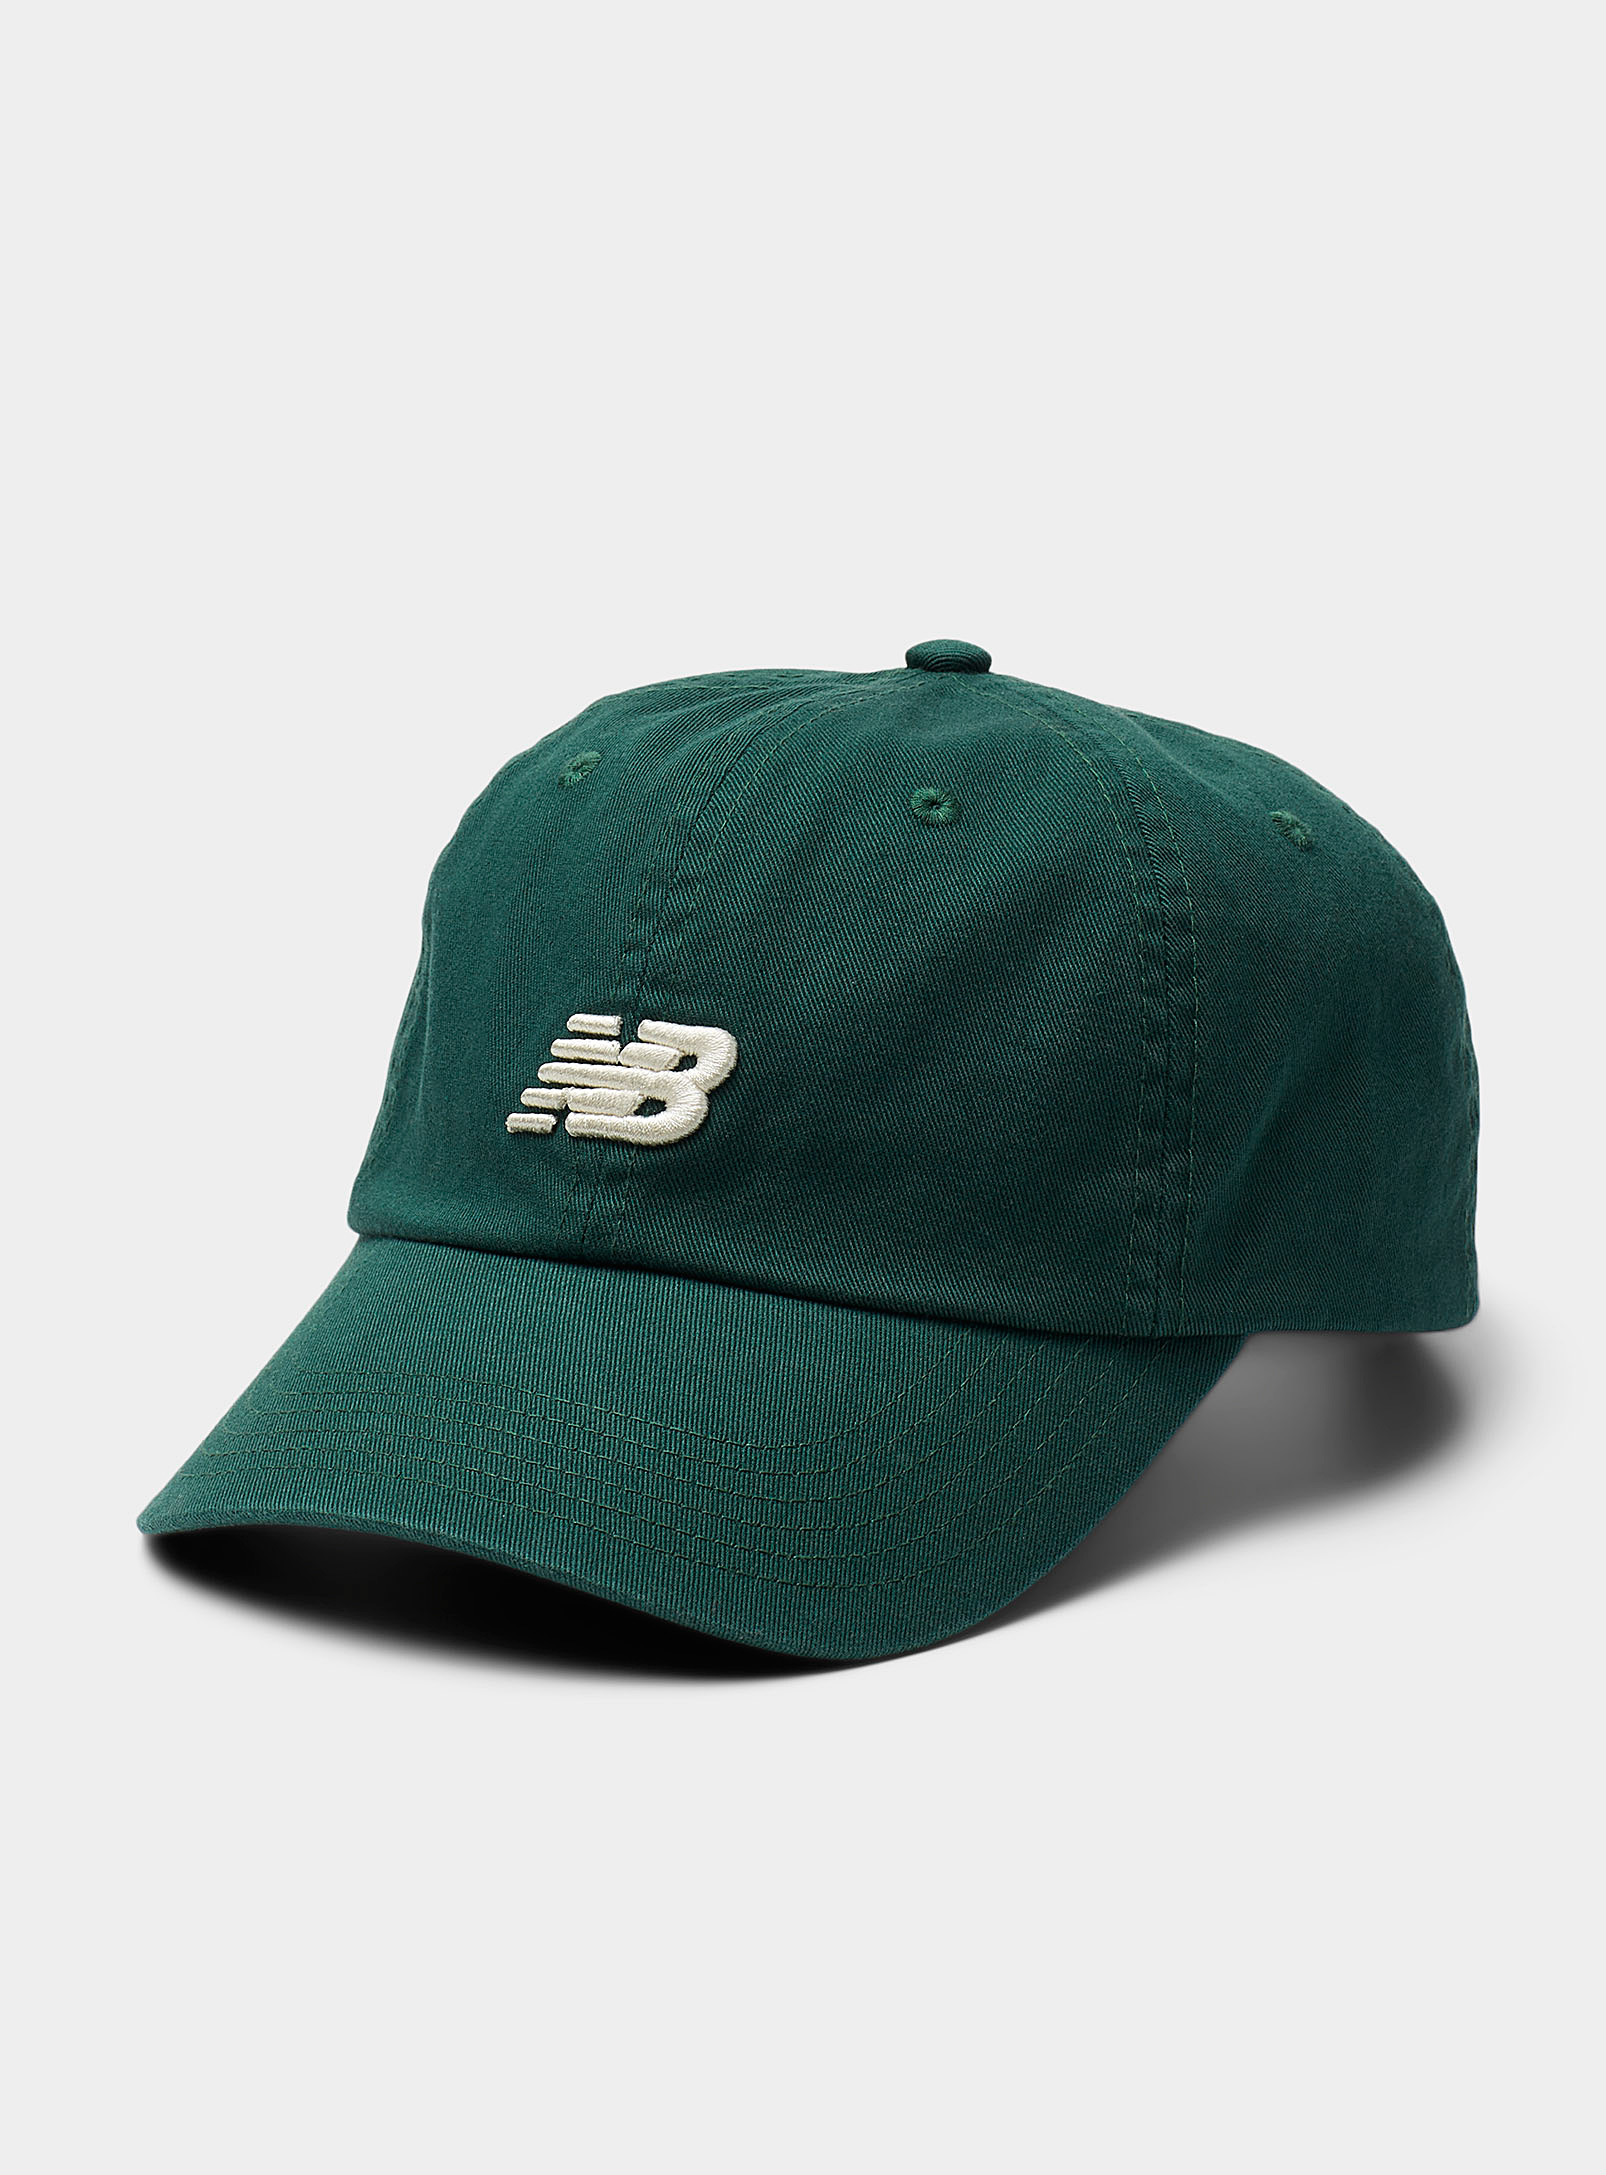 New Balance Embroidered-logo Dad Cap In Green